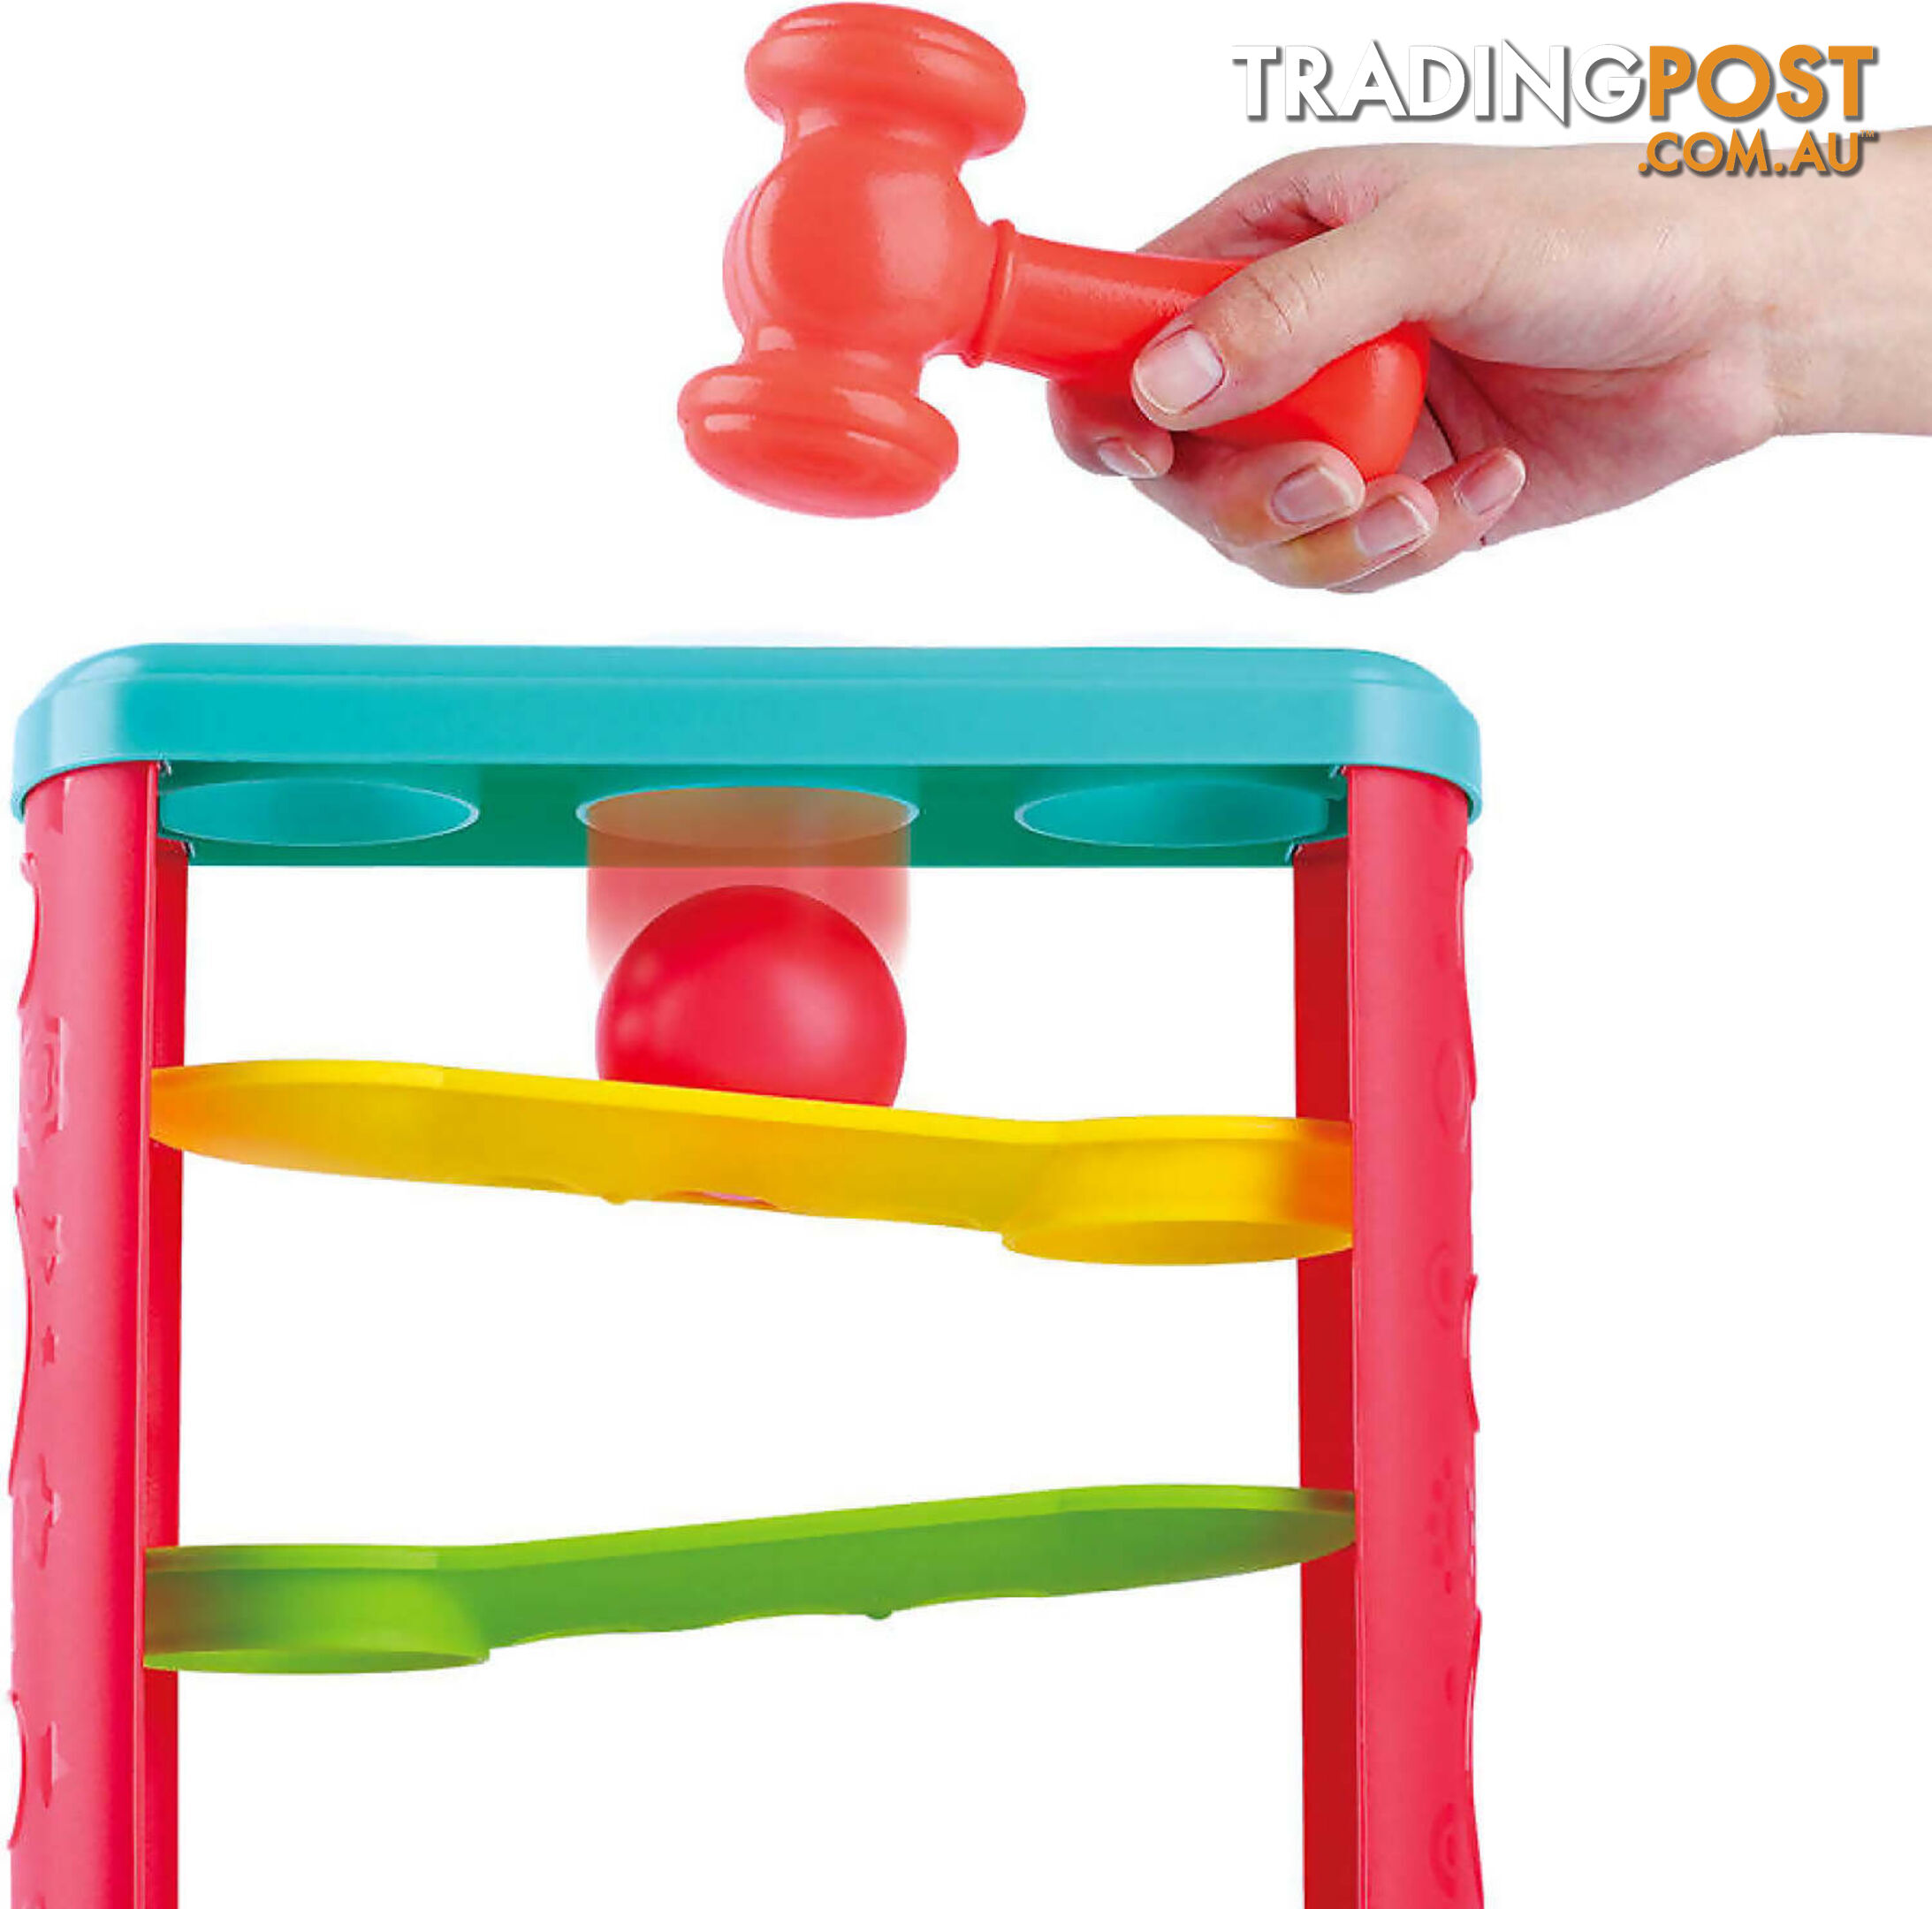 Playgo Toys Ent. Ltd. - Hammer And Roll Tower - Art67187 - 4892401022455